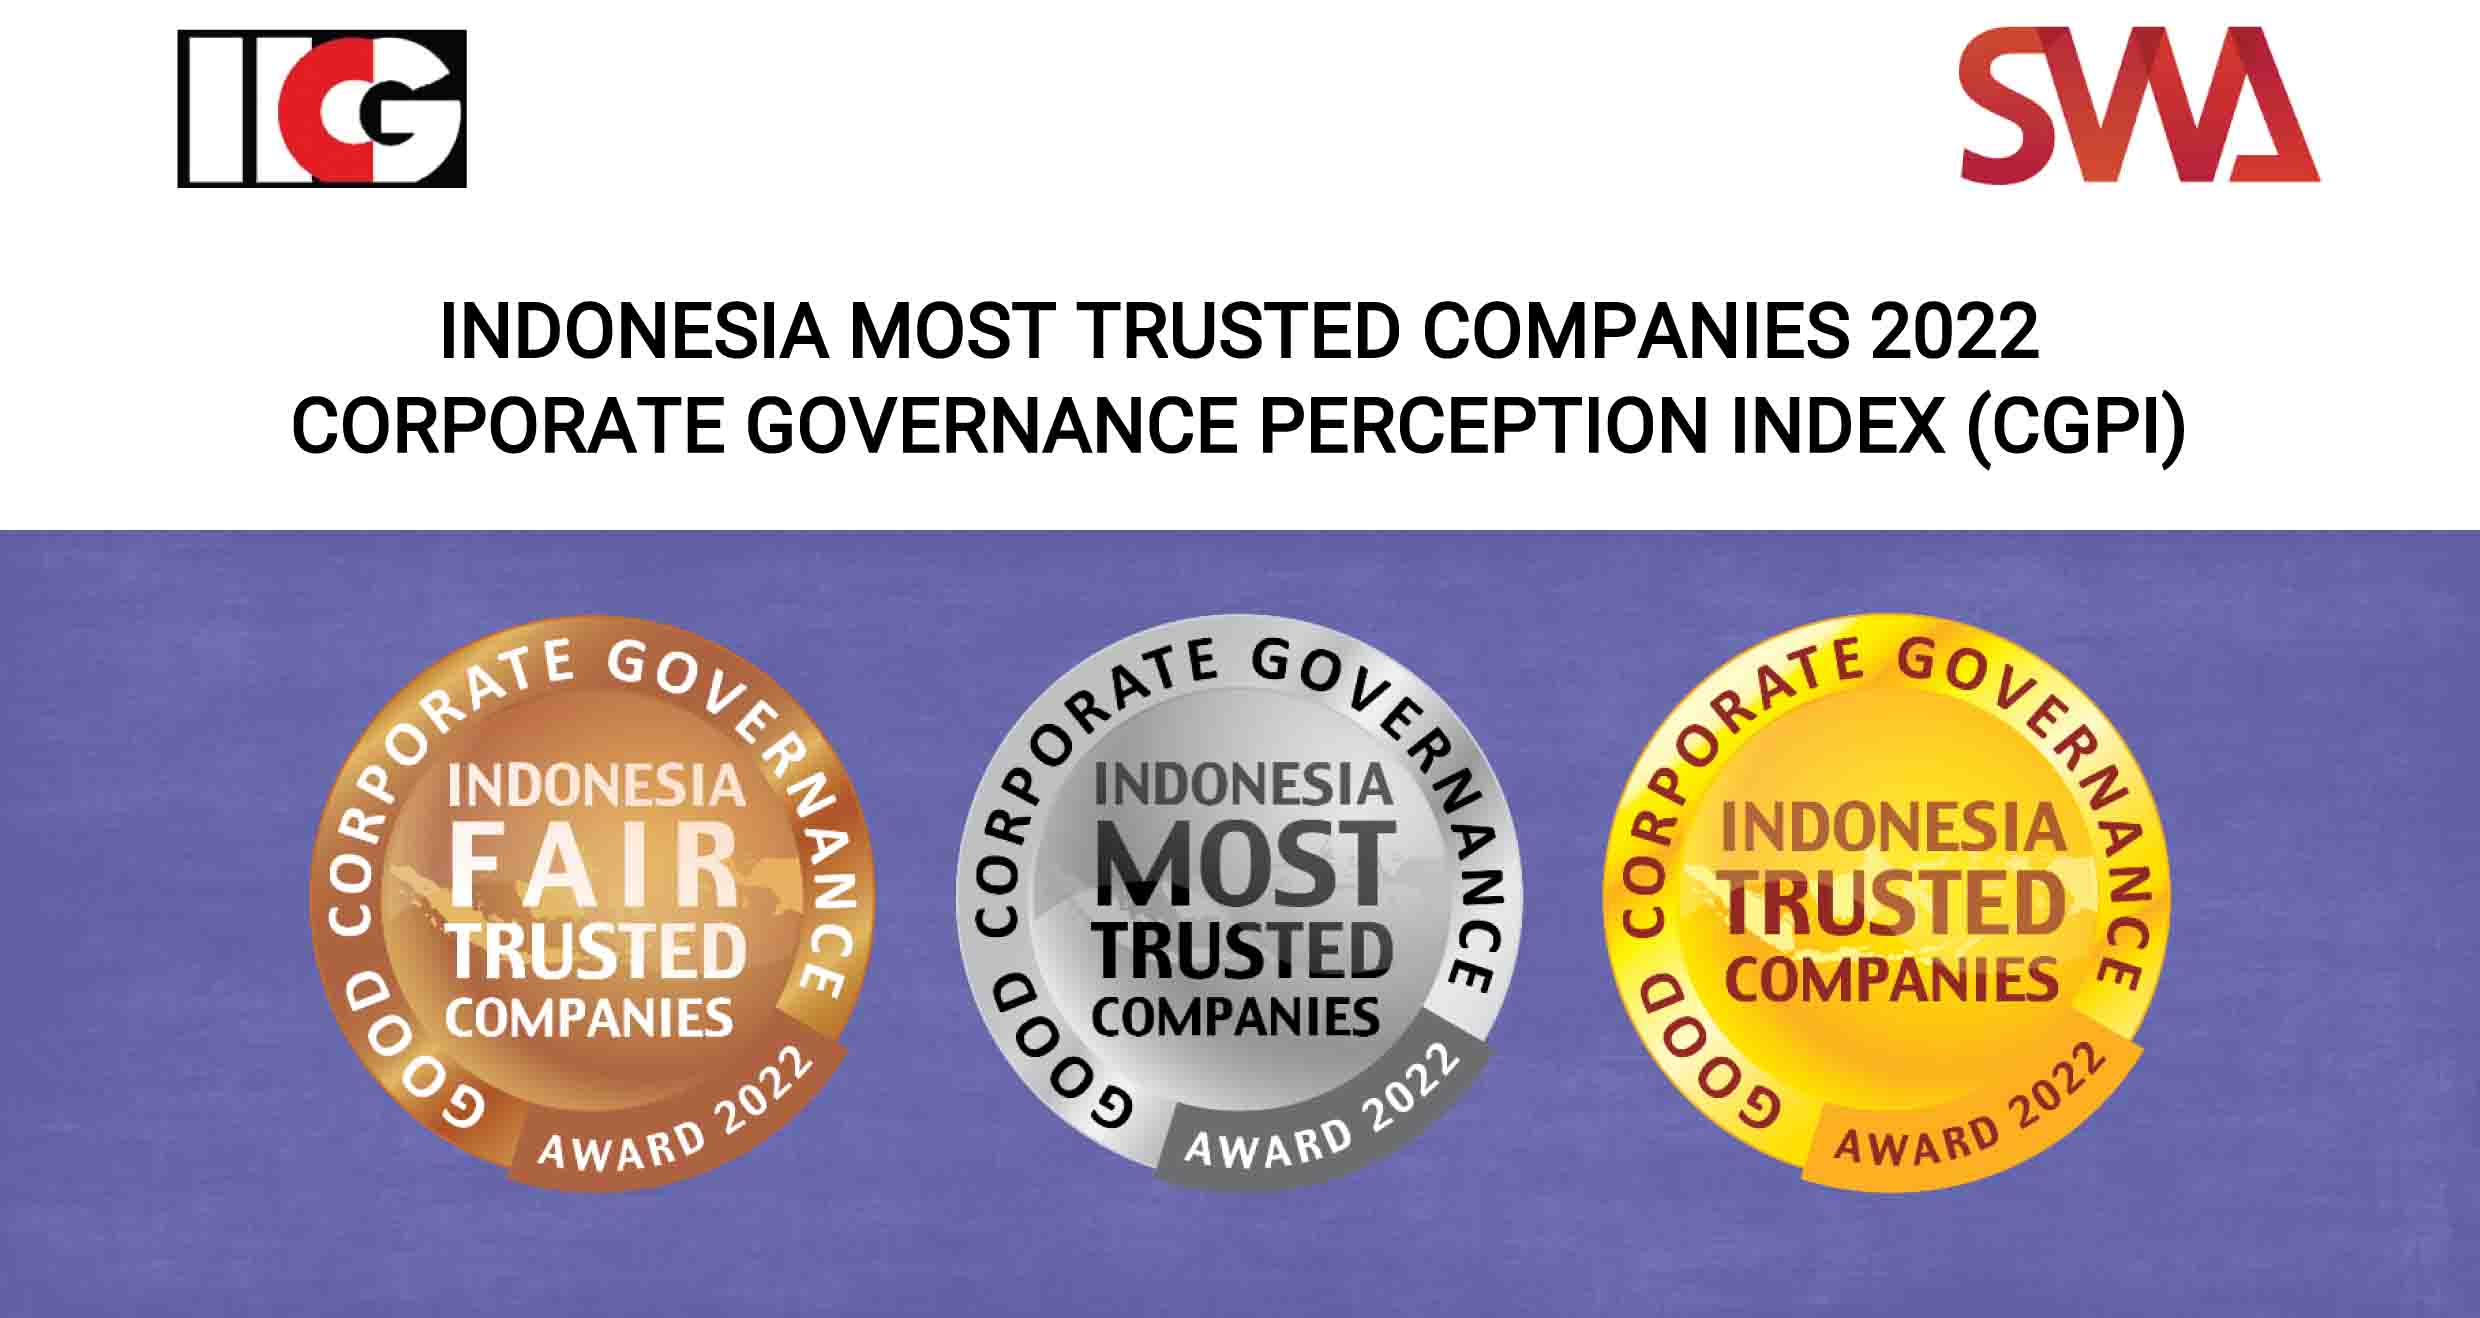 INDONESIA MOST TRUSTED COMPANIES 2022 CORPORATE GOVERNANCE PERCEPTION INDEX (CGPI)